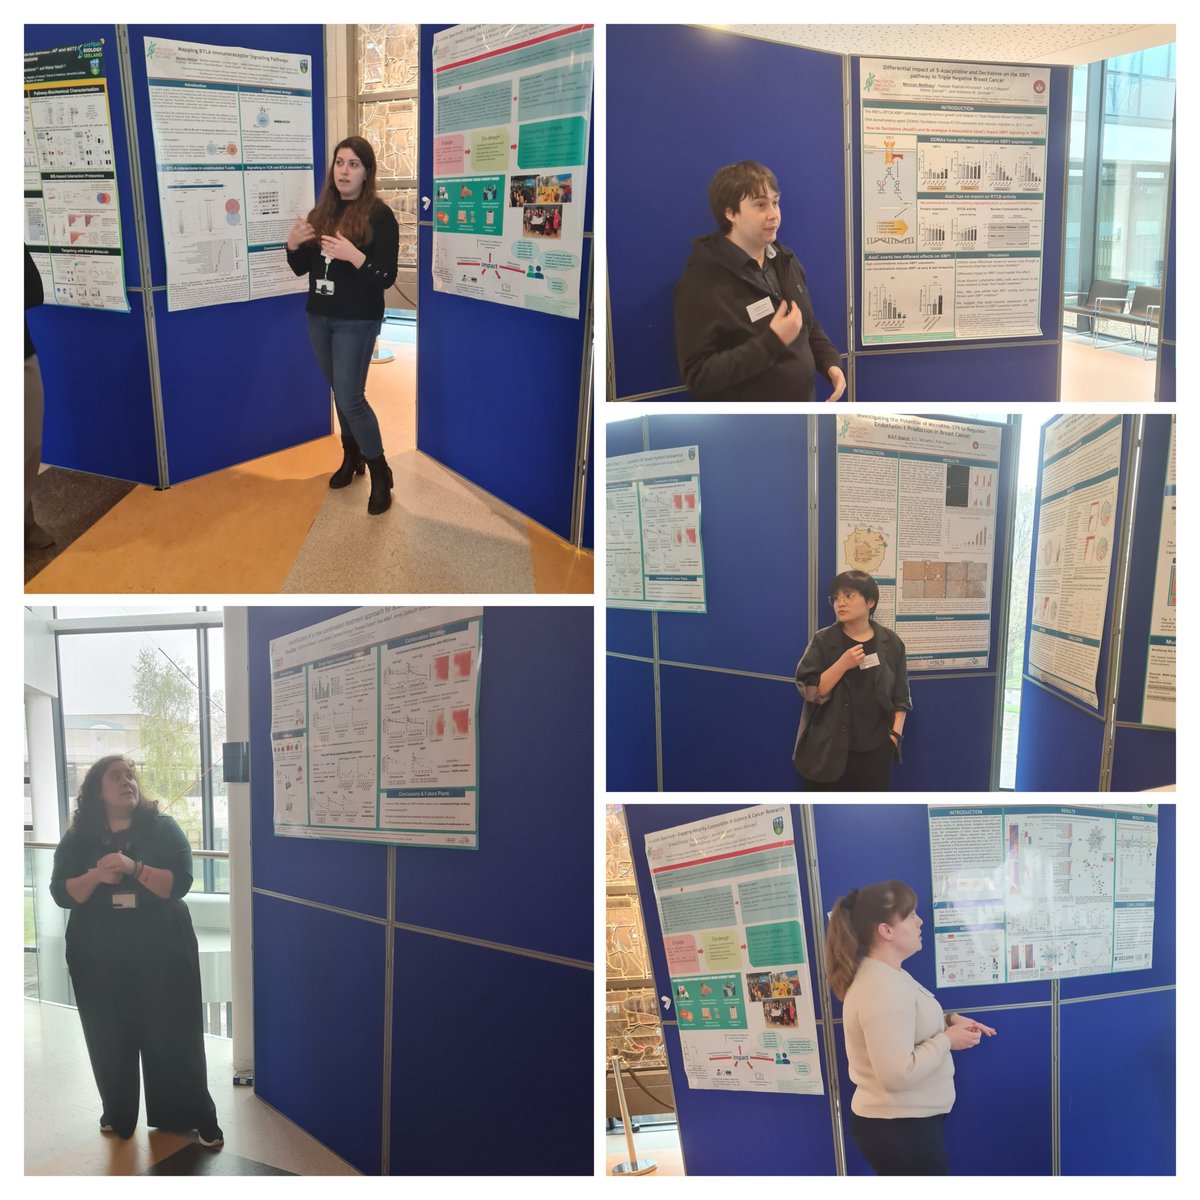 Rounding the day off with a wonderful networking reception and early-career researcher poster session. Thanks to all our ECRs who presented moderated research posters to the SAB Tania Dias Dr. Lili Li Dr. Kathleen Mitchelson Dr. Matthieu Moncan Dr. Myriam Nabhan